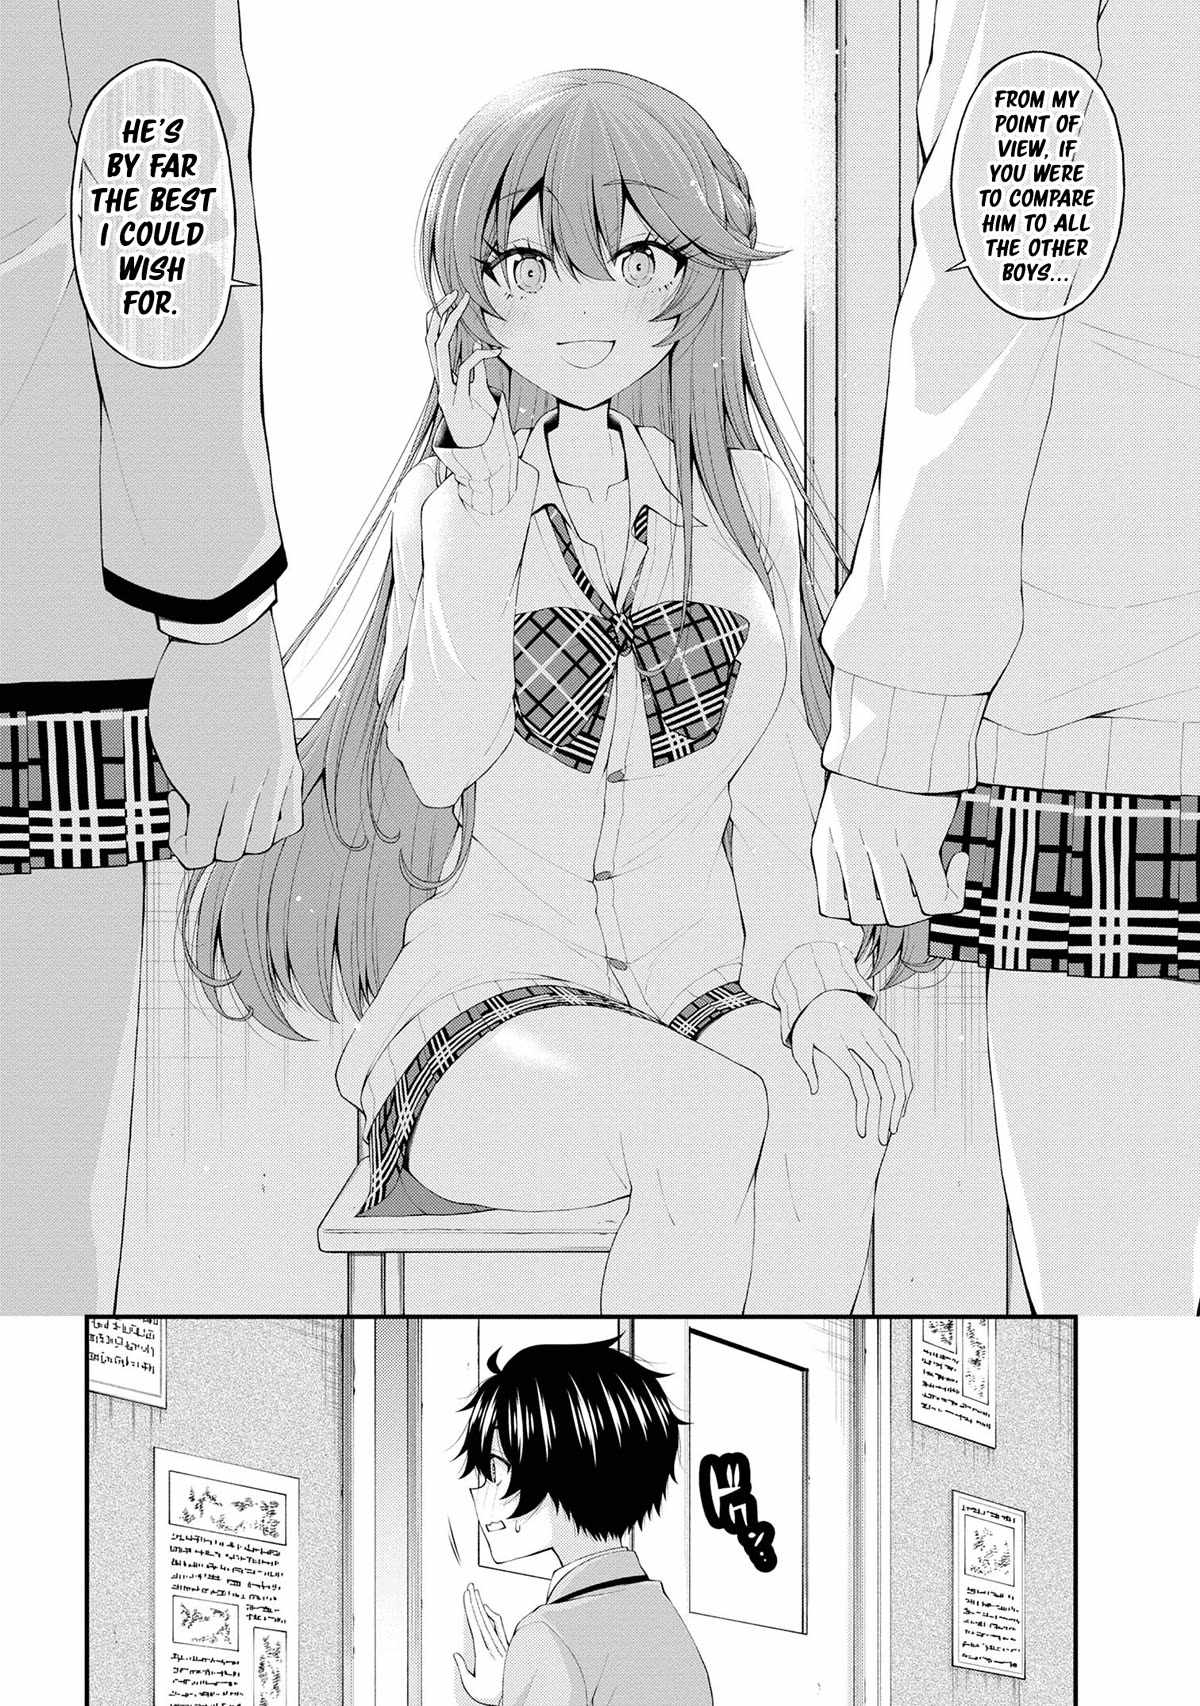 The Gal Who Was Meant to Confess to Me as a Game Punishment Has Apparently Fallen in Love with Me Chapter 13-eng-li - Page 7